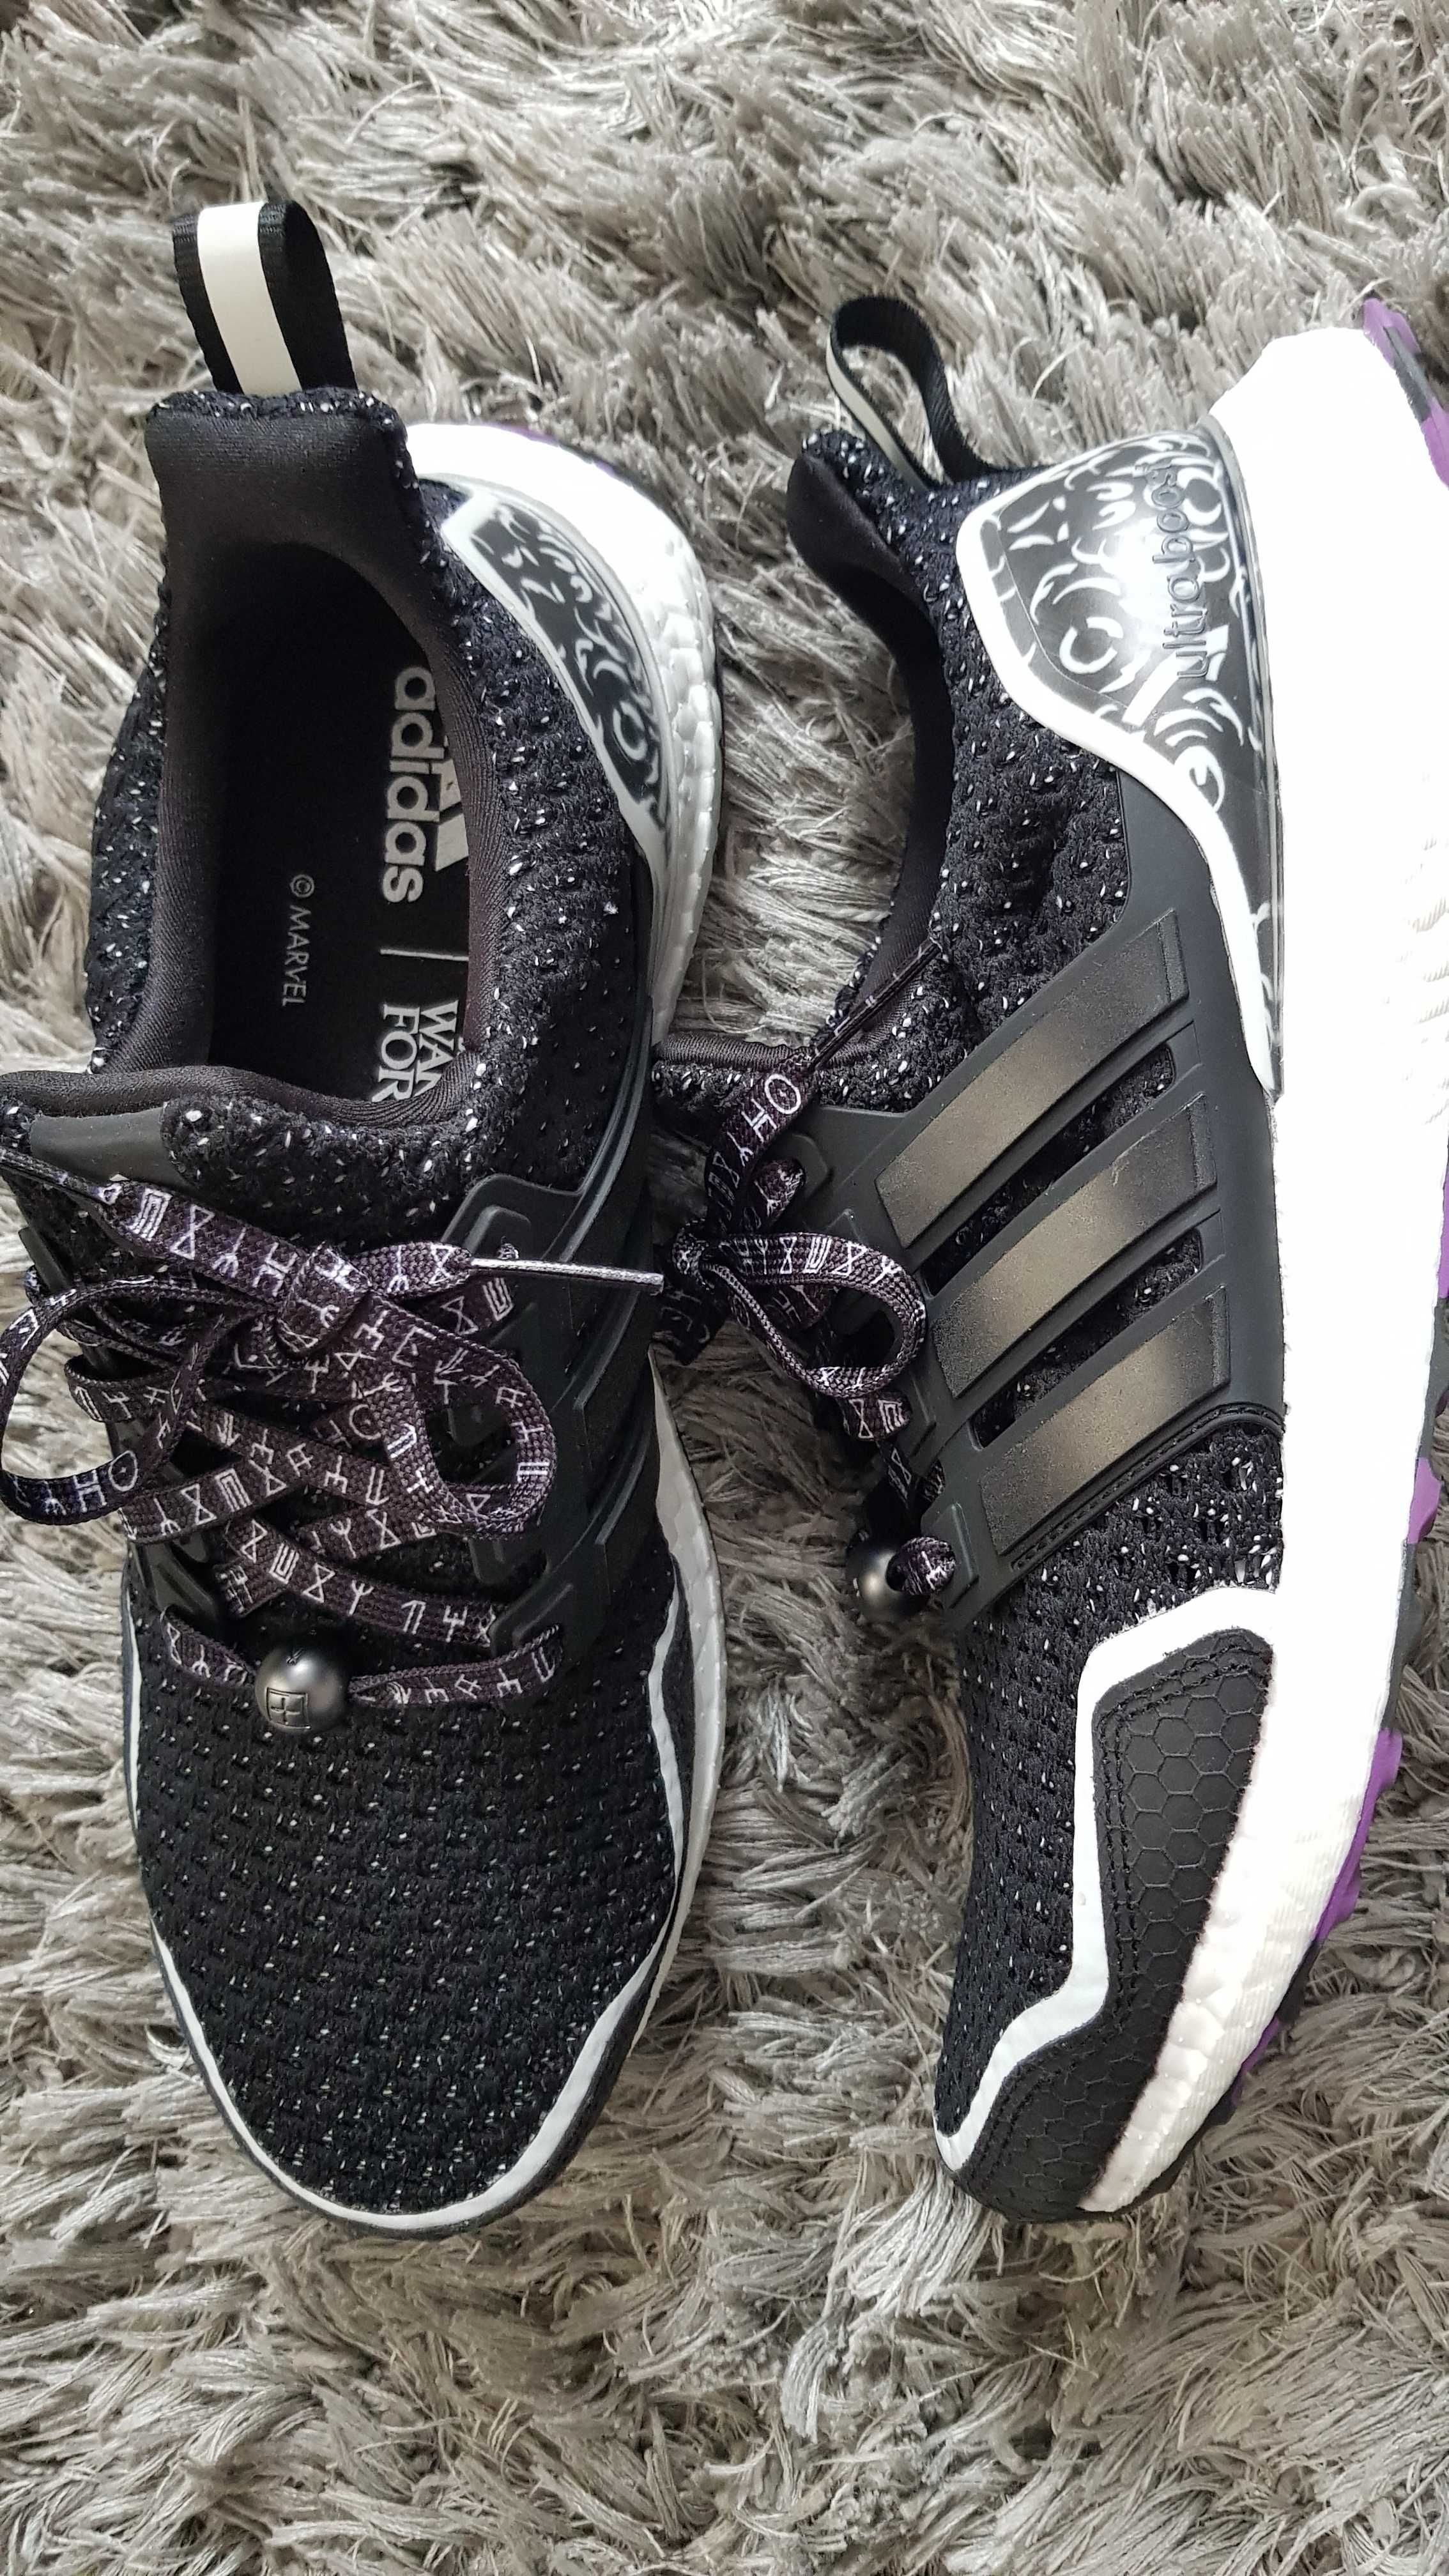 buty adidas Ultraboost 5.0 x Marvel Black Panther Shoes